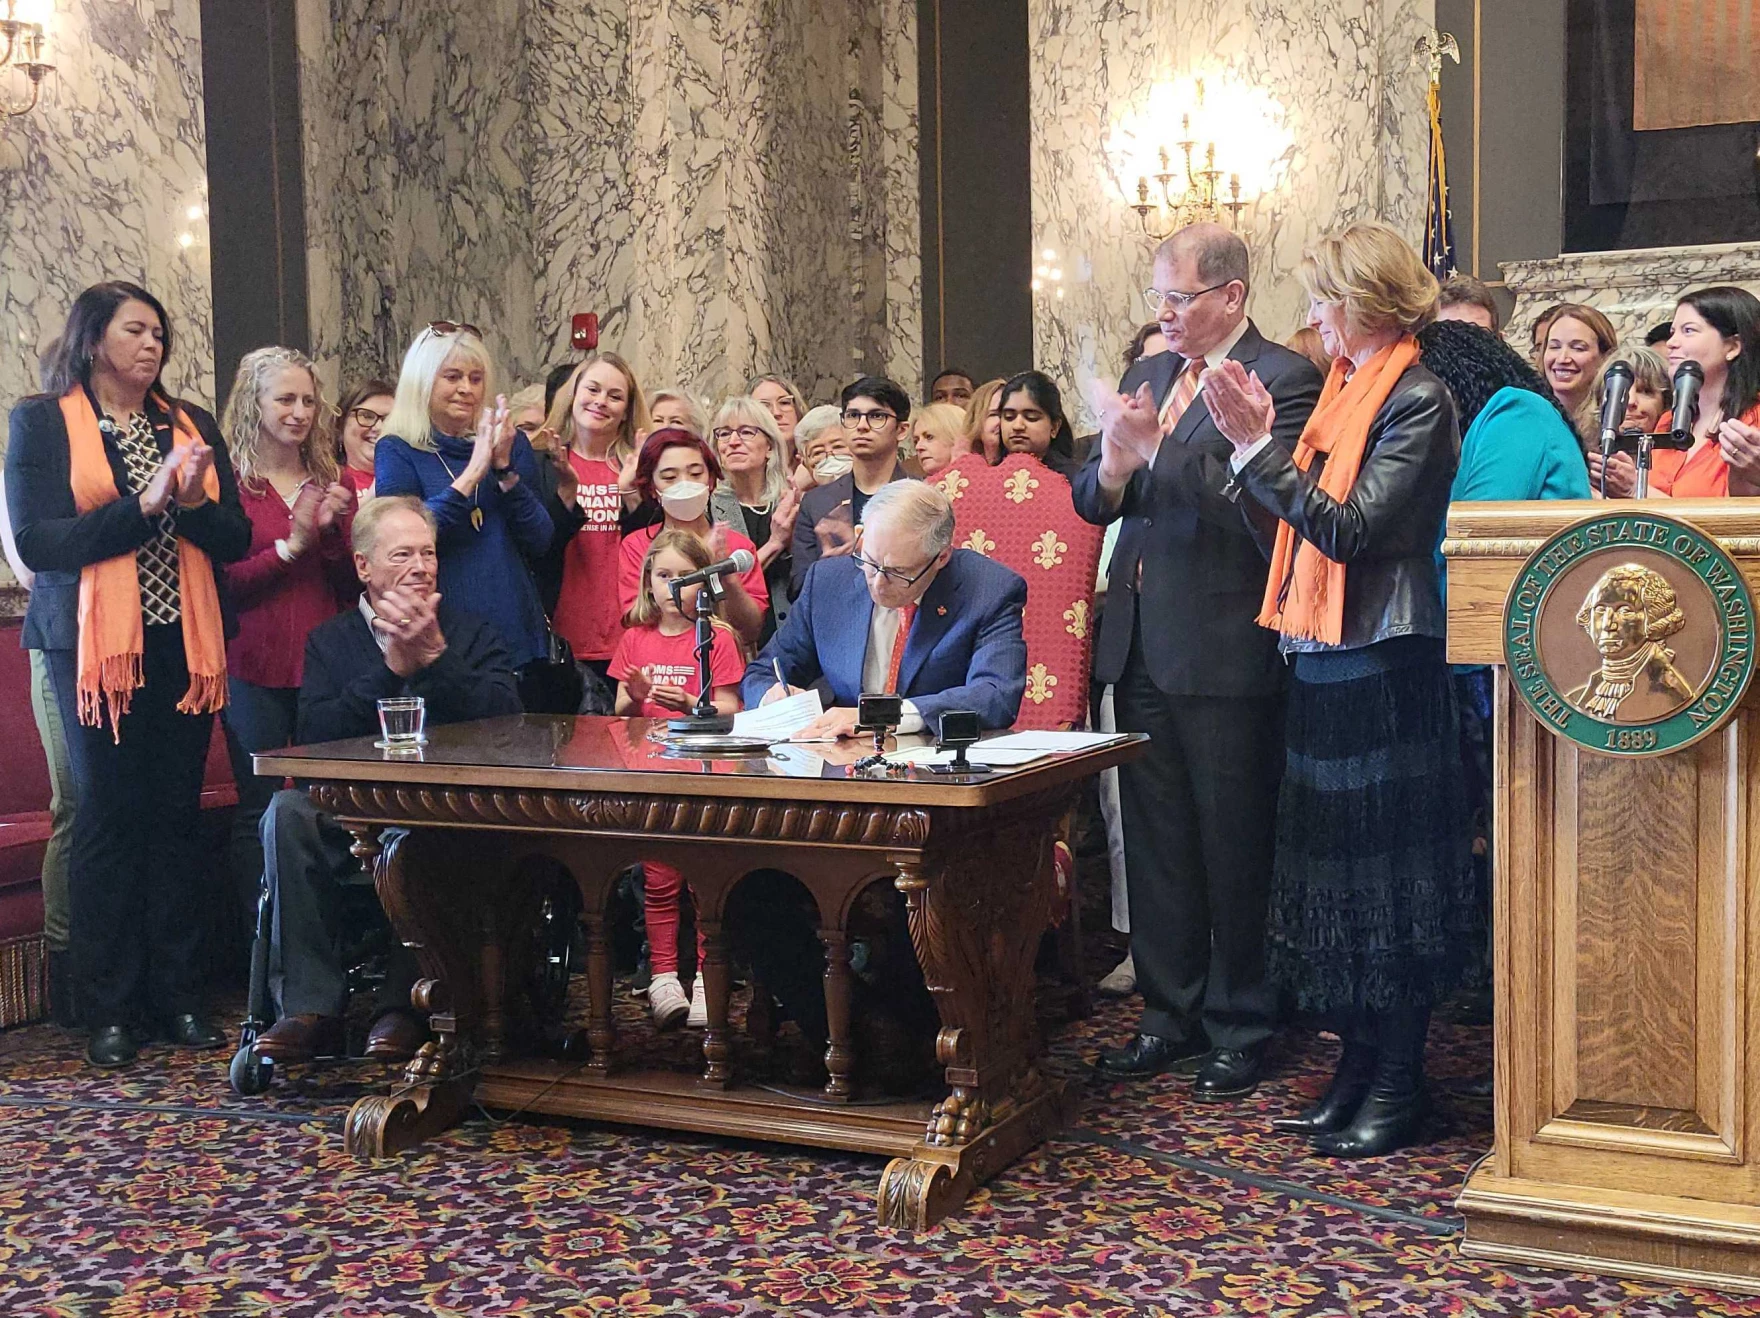 Washington Gov. Jay Inslee signed three new gun bills into law Tuesday, including an assault weapons ban that takes immediate effect